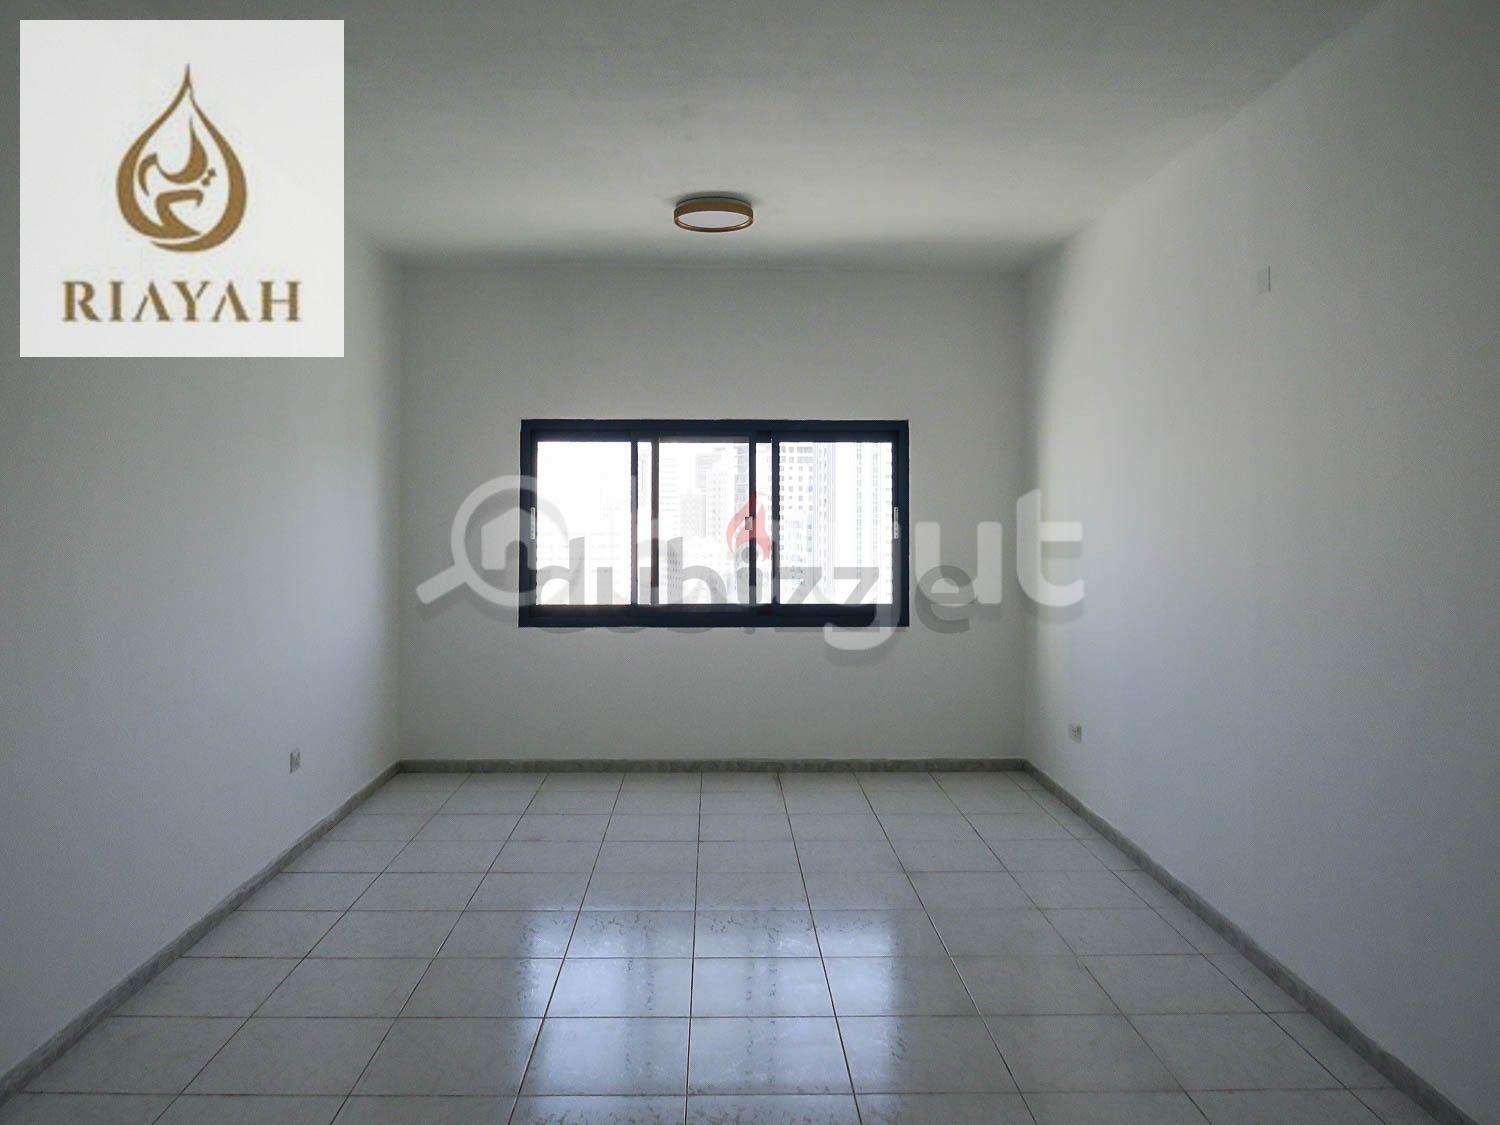 Chiller A/c Free | Hot Deal ! Apartment Central Air Conditioning In Very Well Maintained Building